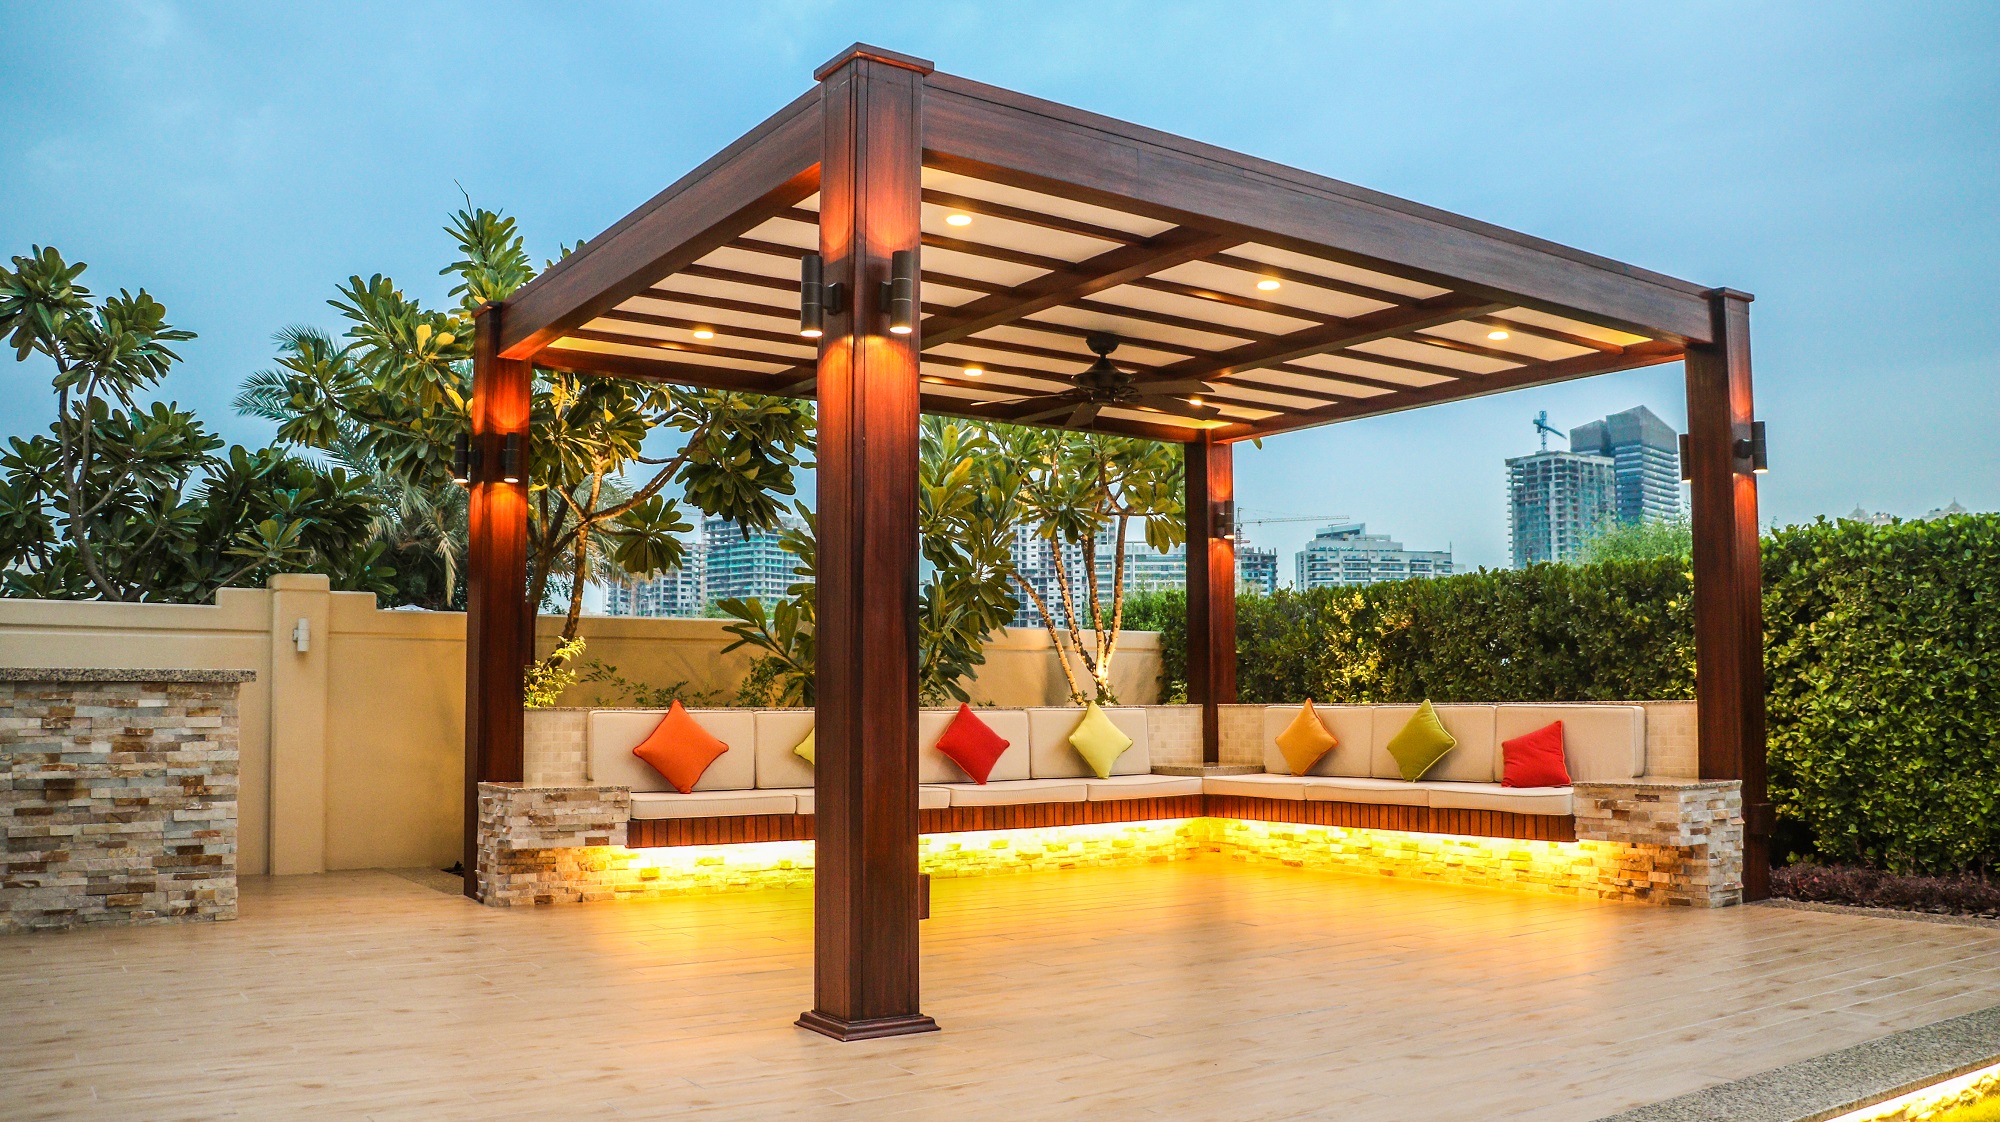 A stunning pergola design will take your backyard to new levels of exciting.